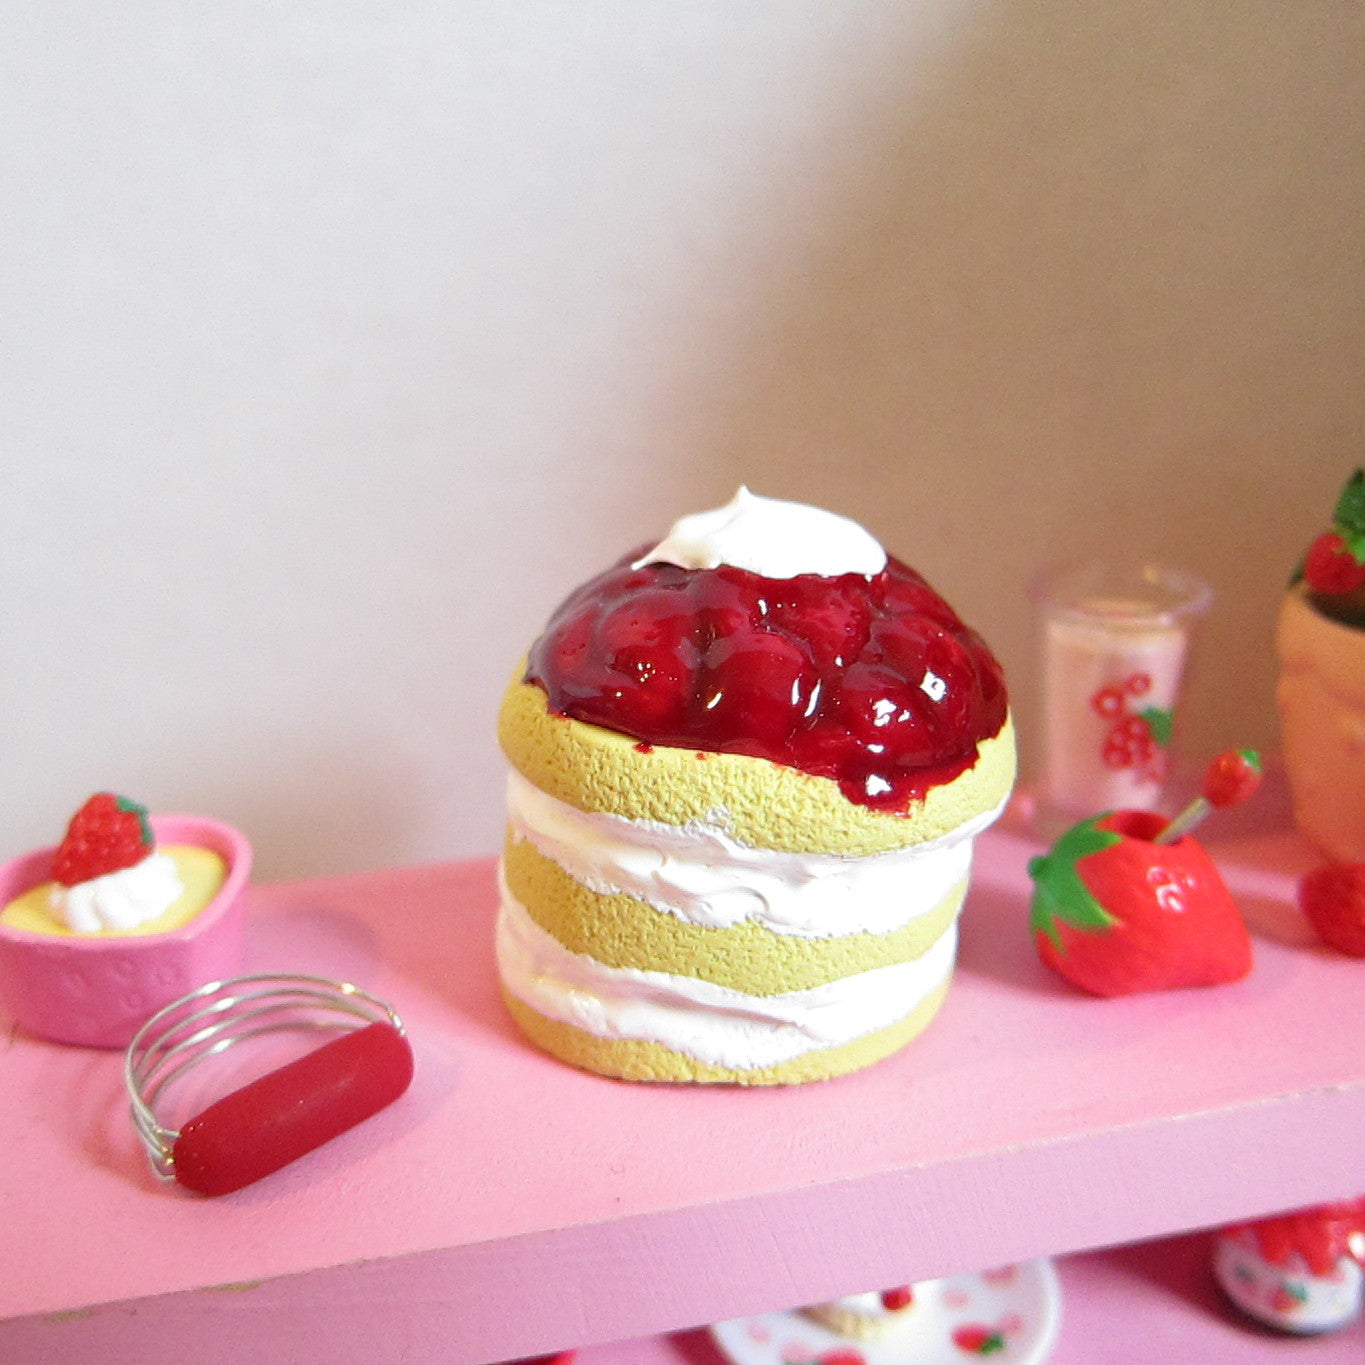 Claystationyong: Our mini cakes are handmade from polymer clay - for sale.